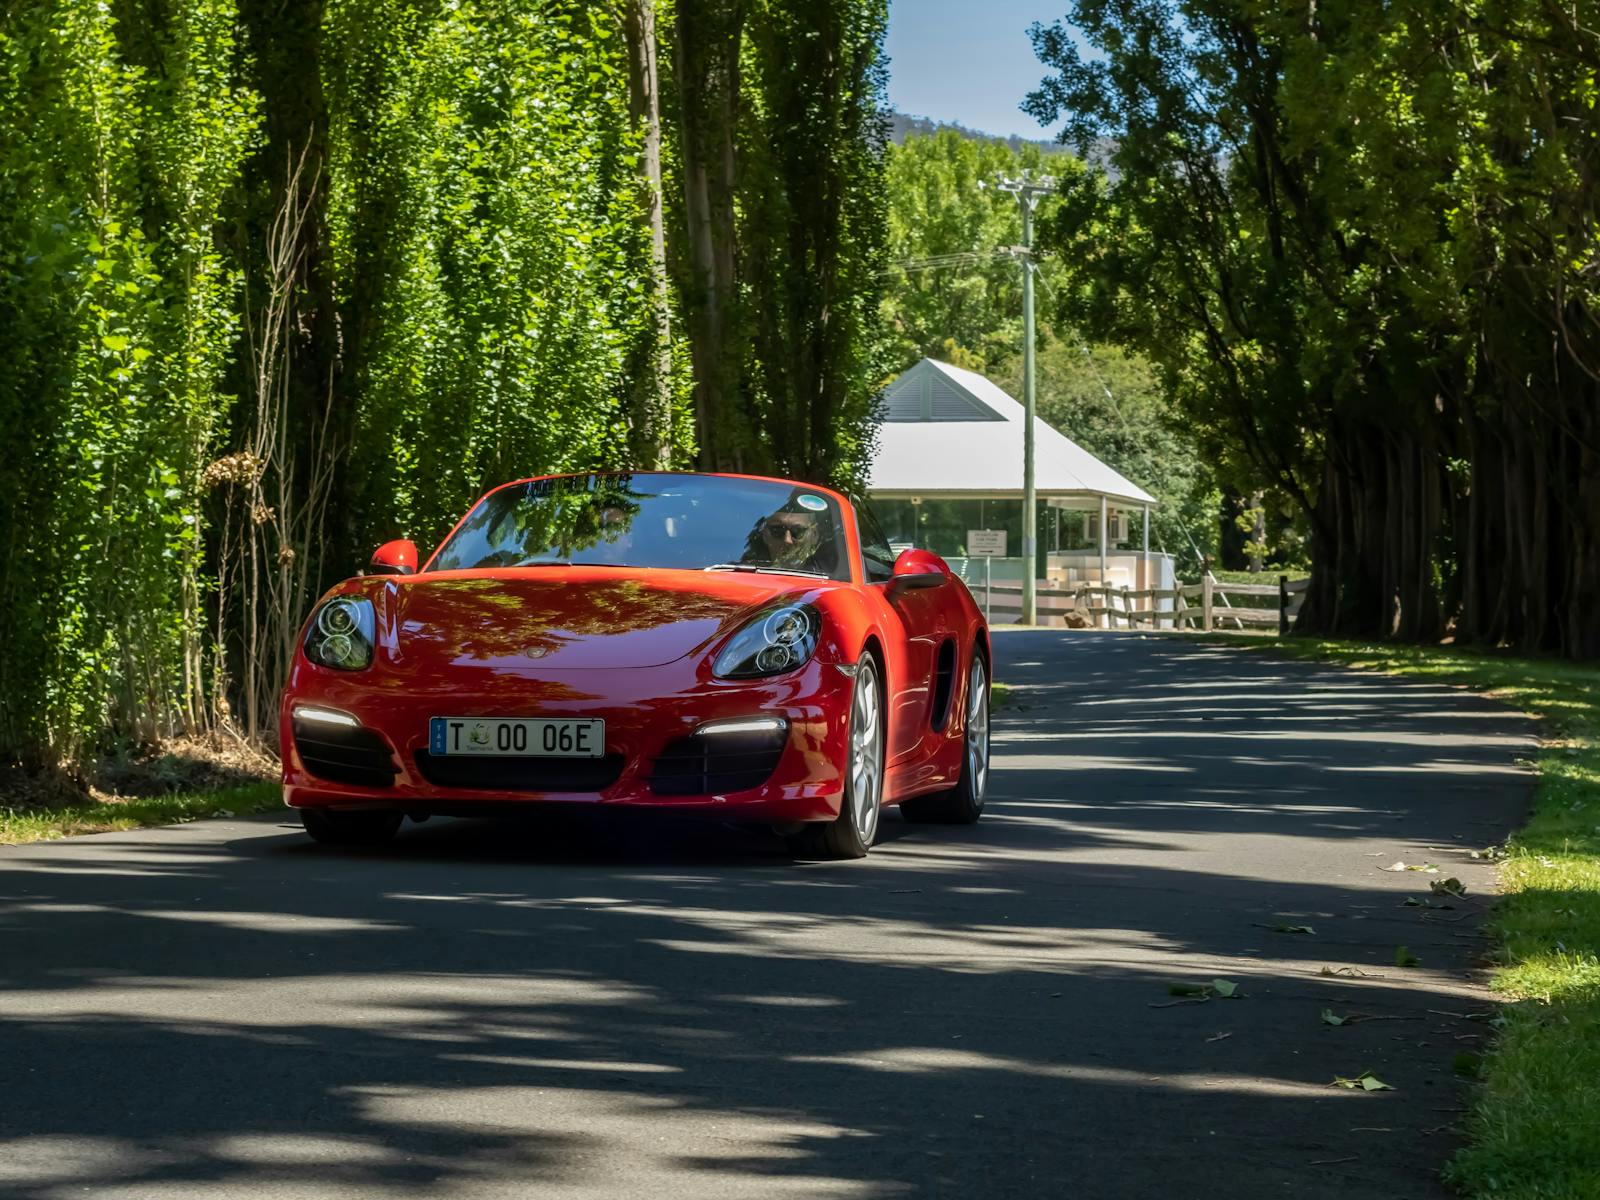 Porsche rental in Tasmania with Overdrive Car Hire